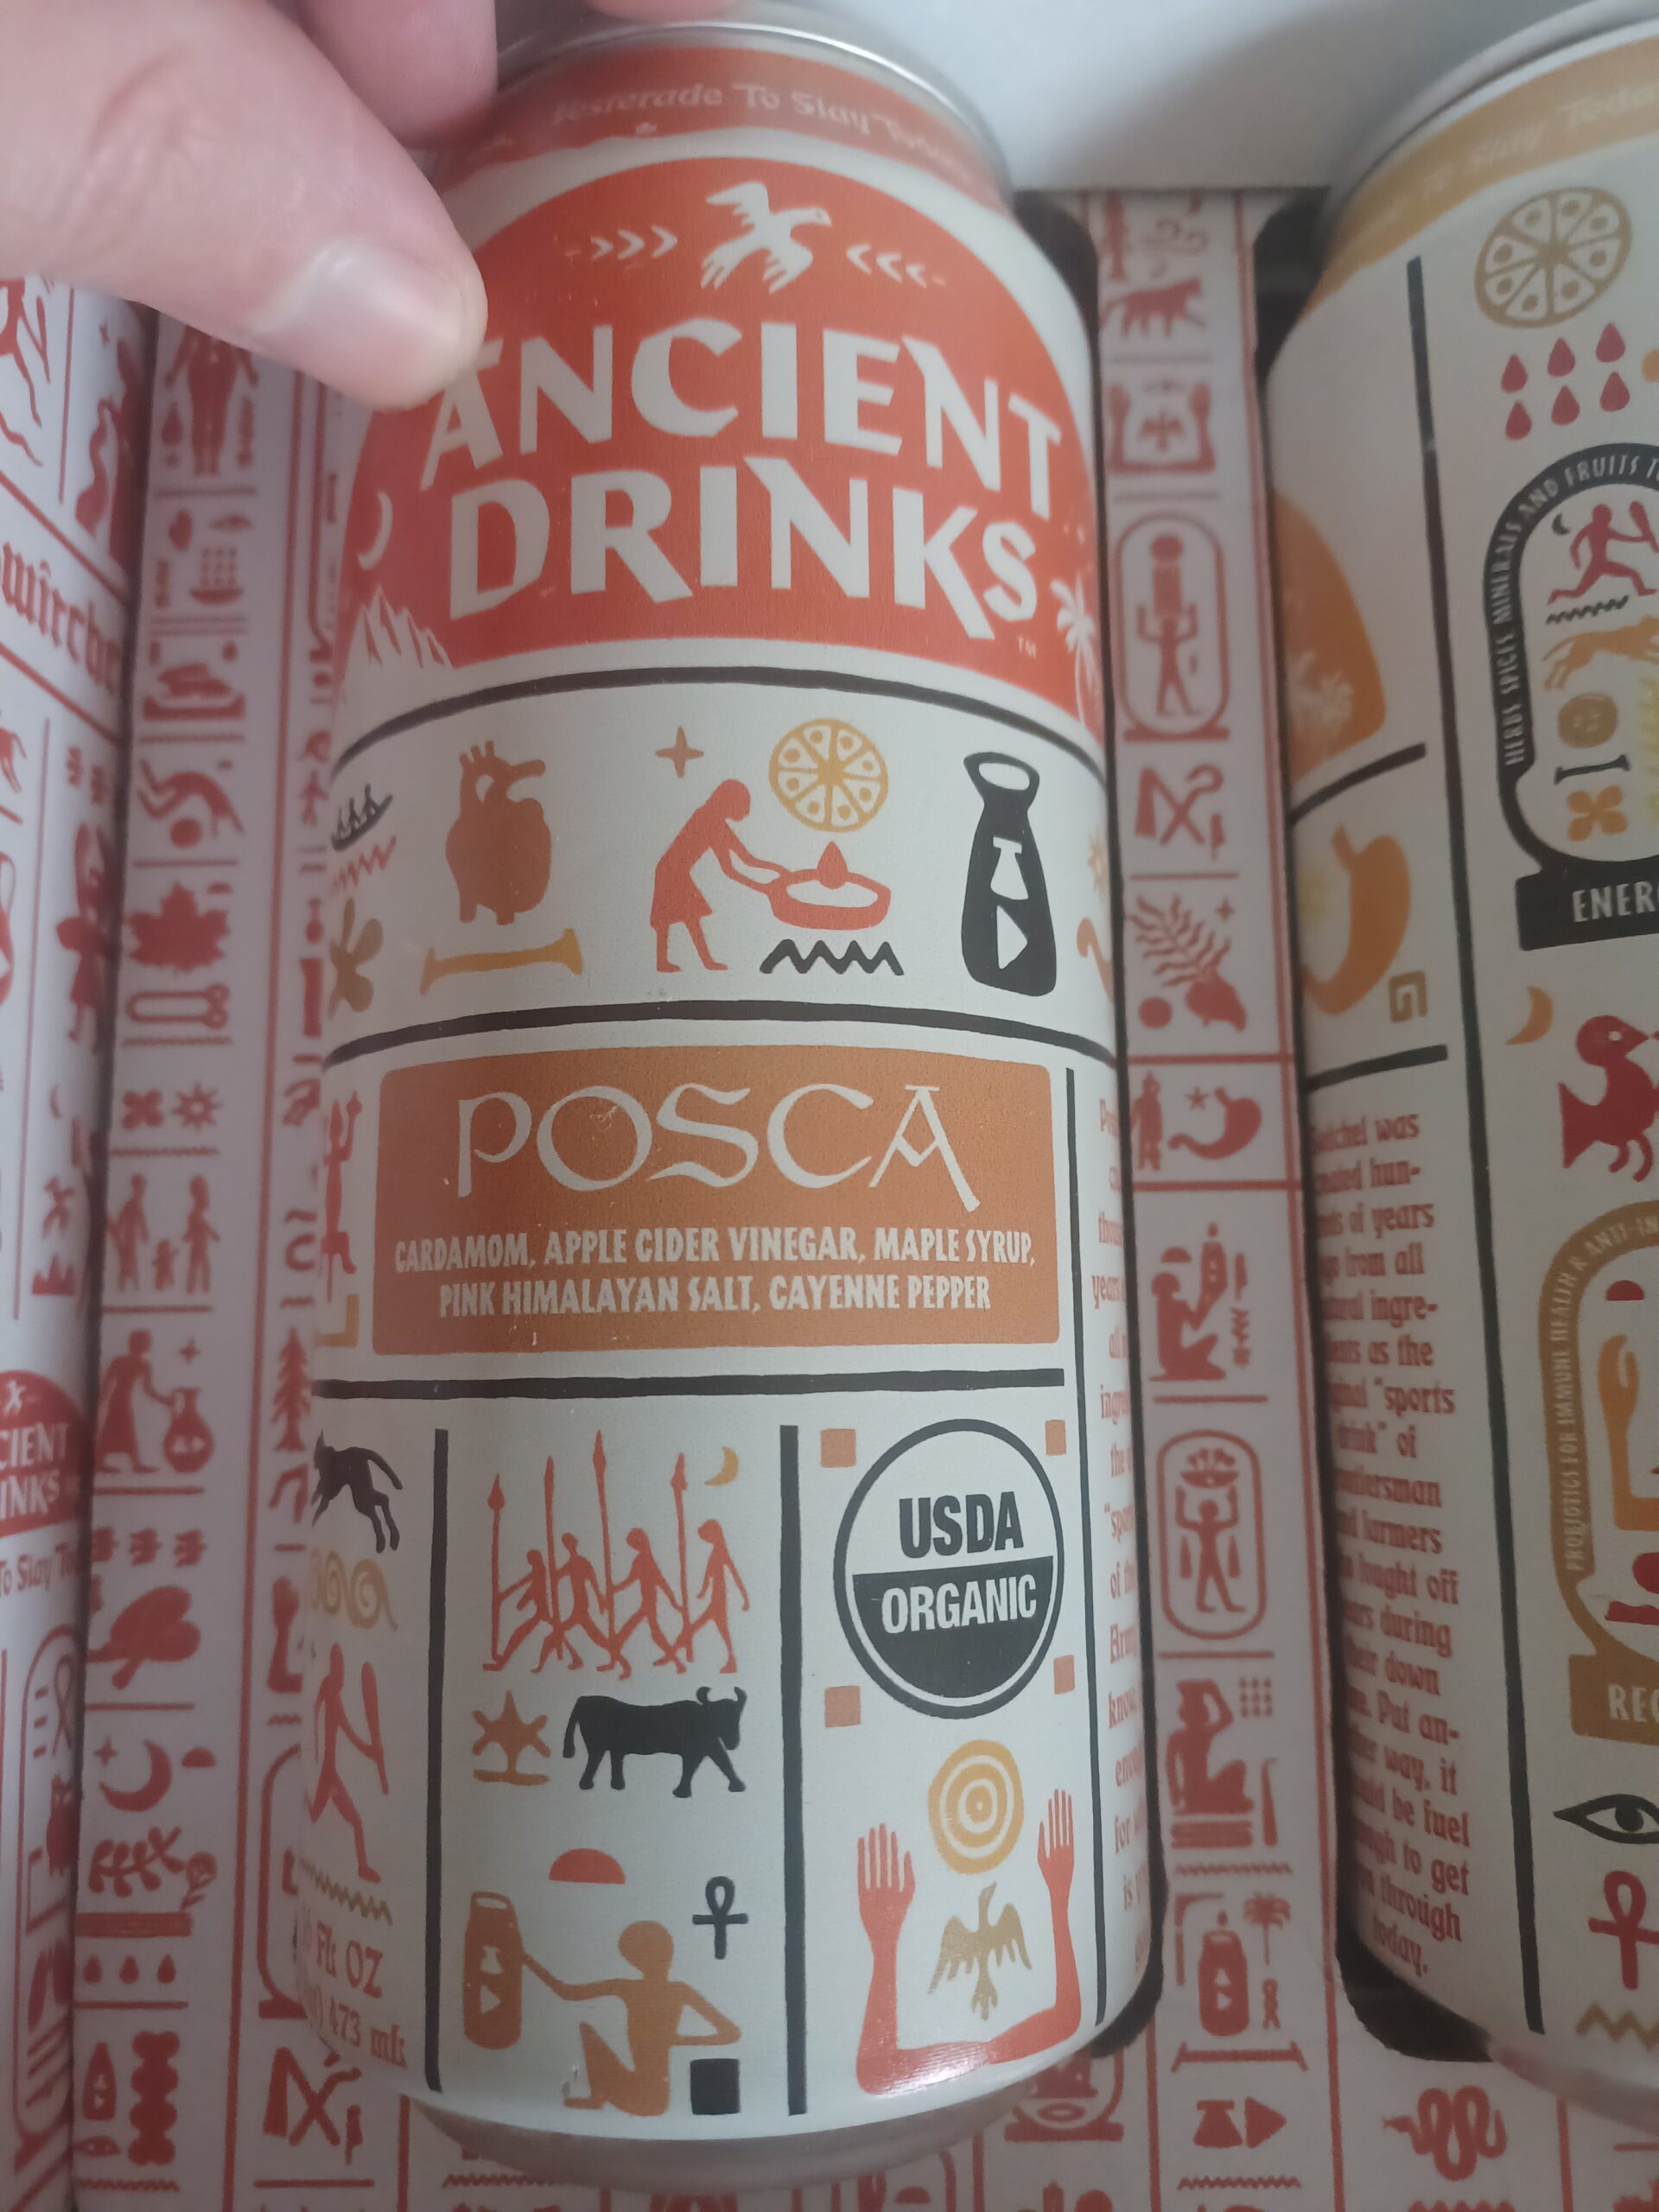 Posca, a drink similar to Switchel made by Ancient Drinks. 